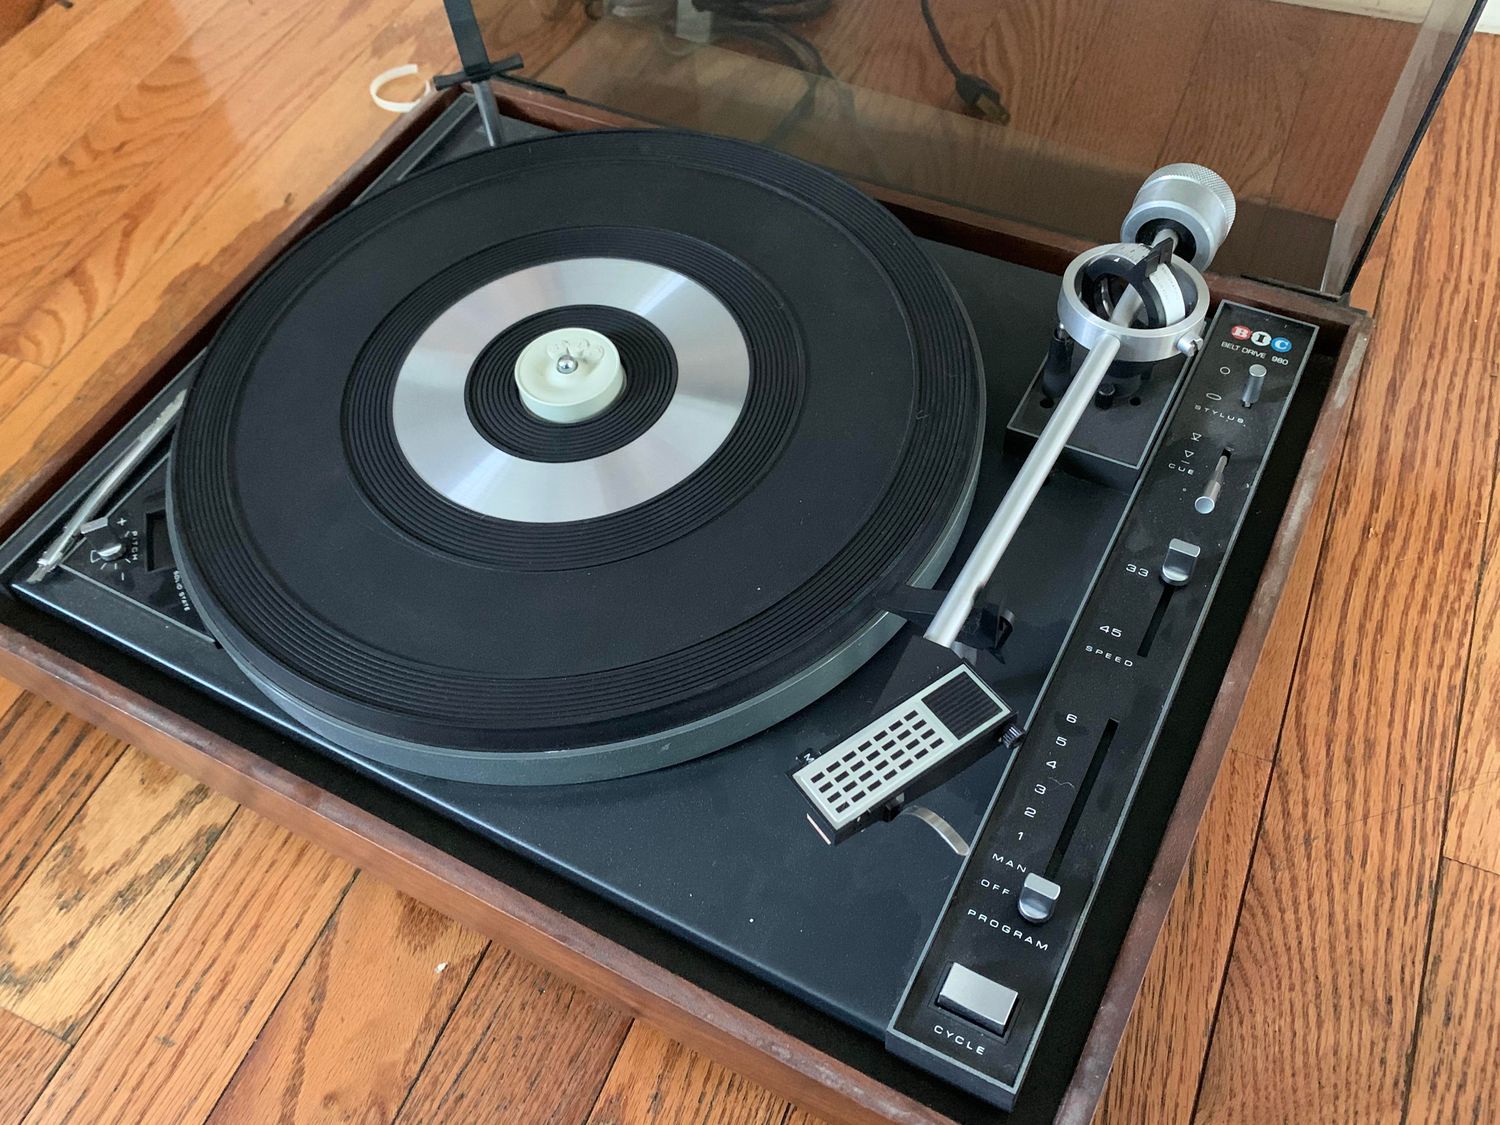 How To Set The Tone Arm On A Bic 980 Turntable